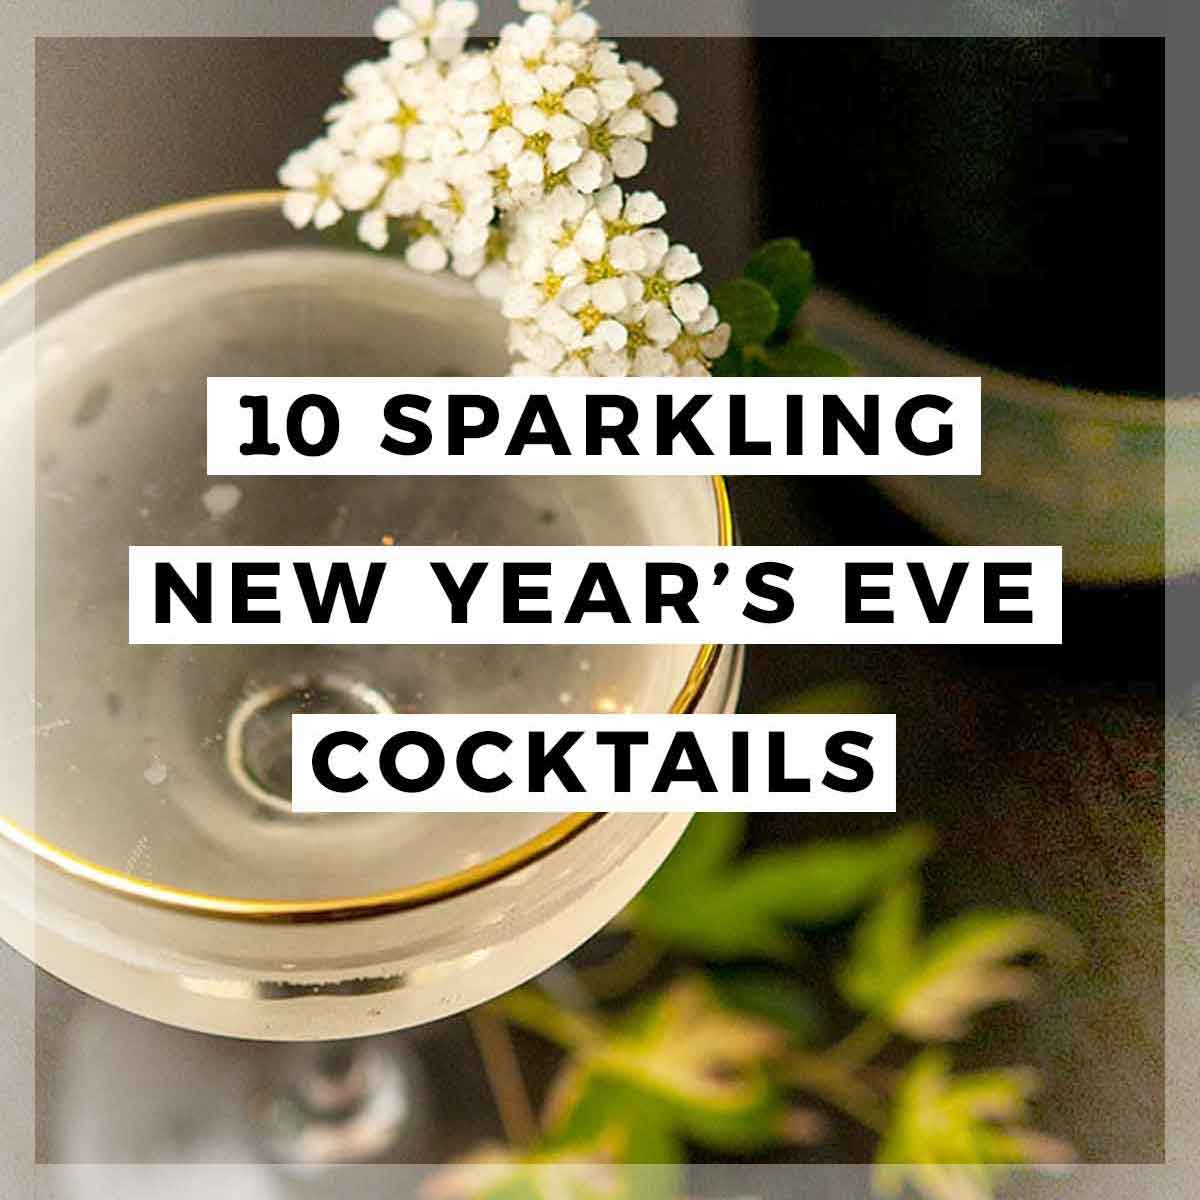 A flower-garnished cocktail with a title that says "10 Sparkling New Year's Even Cocktails."